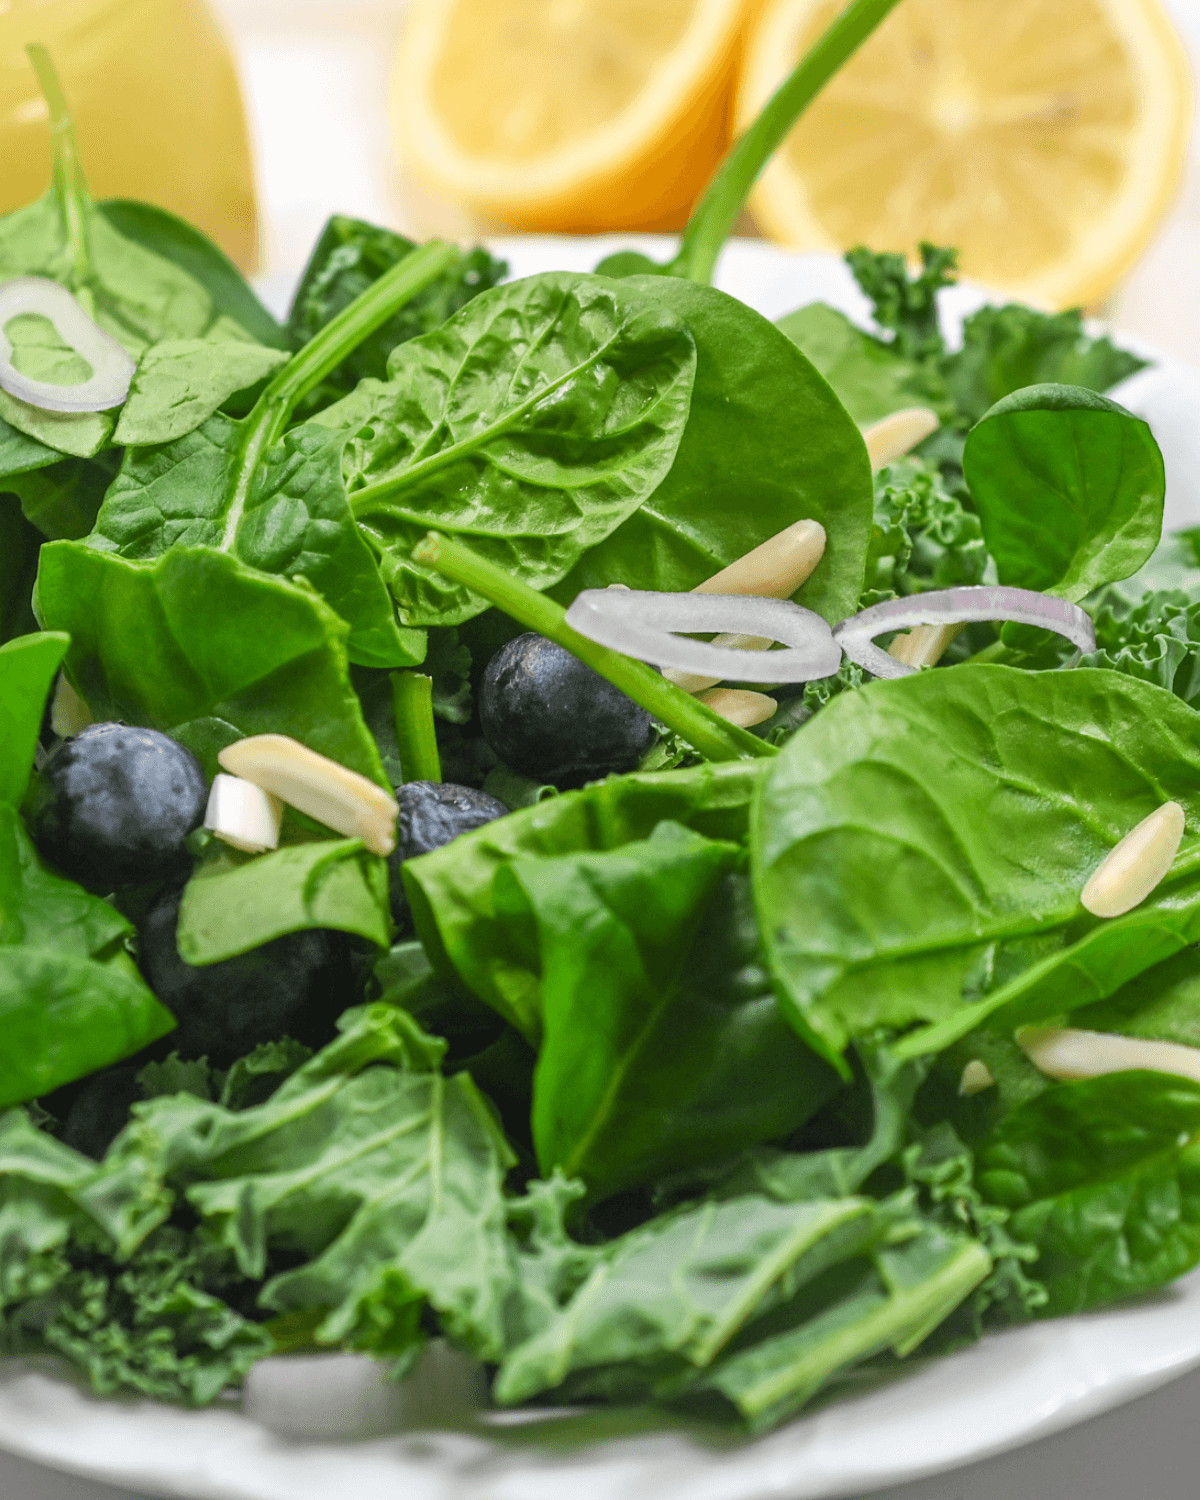 A plate of kale and spinach salad with blueberries and citrus vinaigrette.